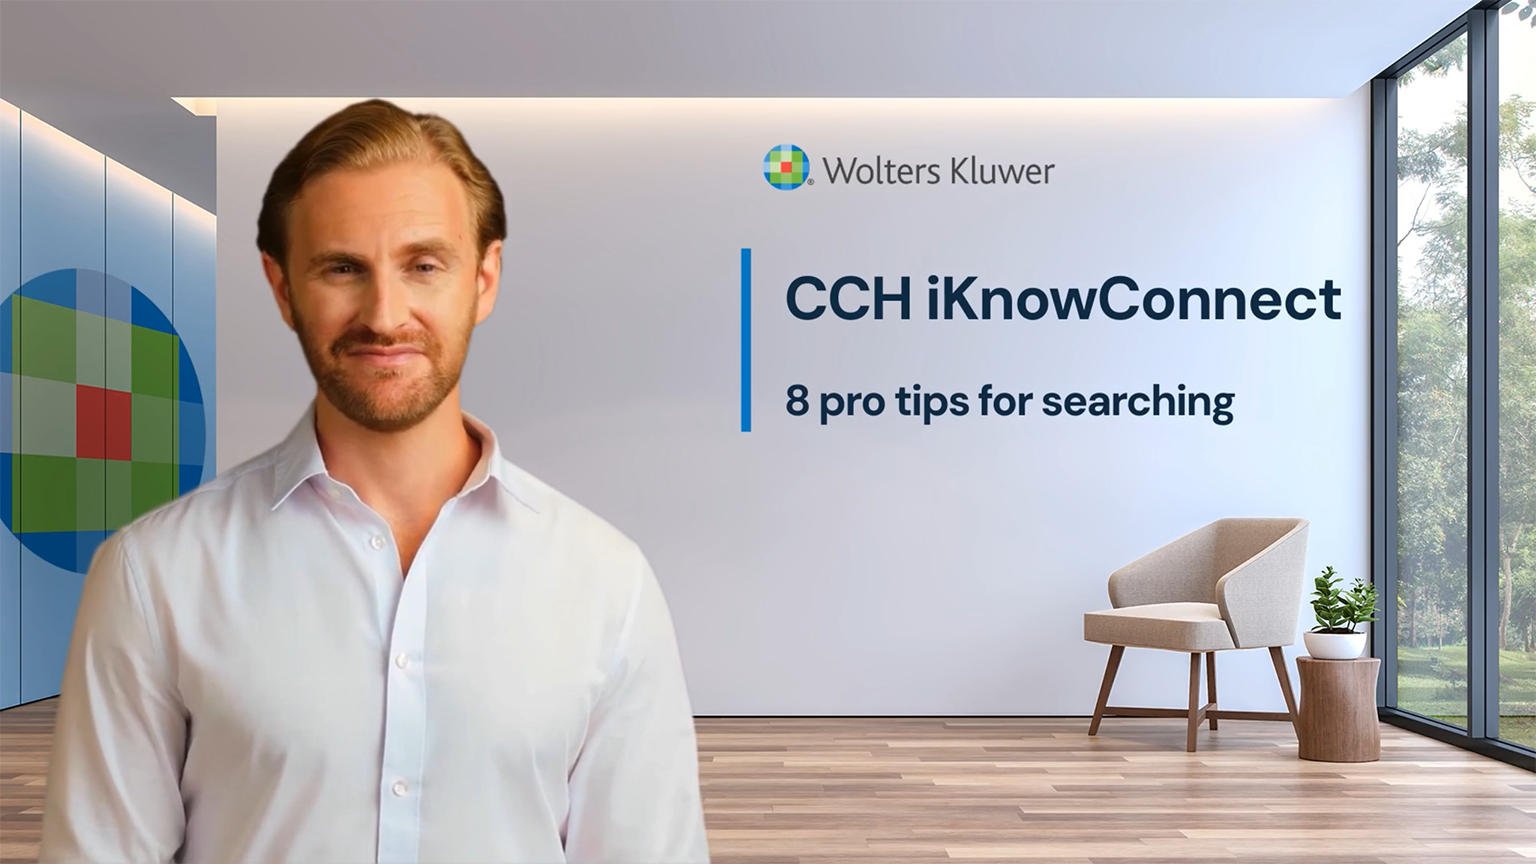 Screenshot of CCH iKnowConnect 8 pro tips for searching video